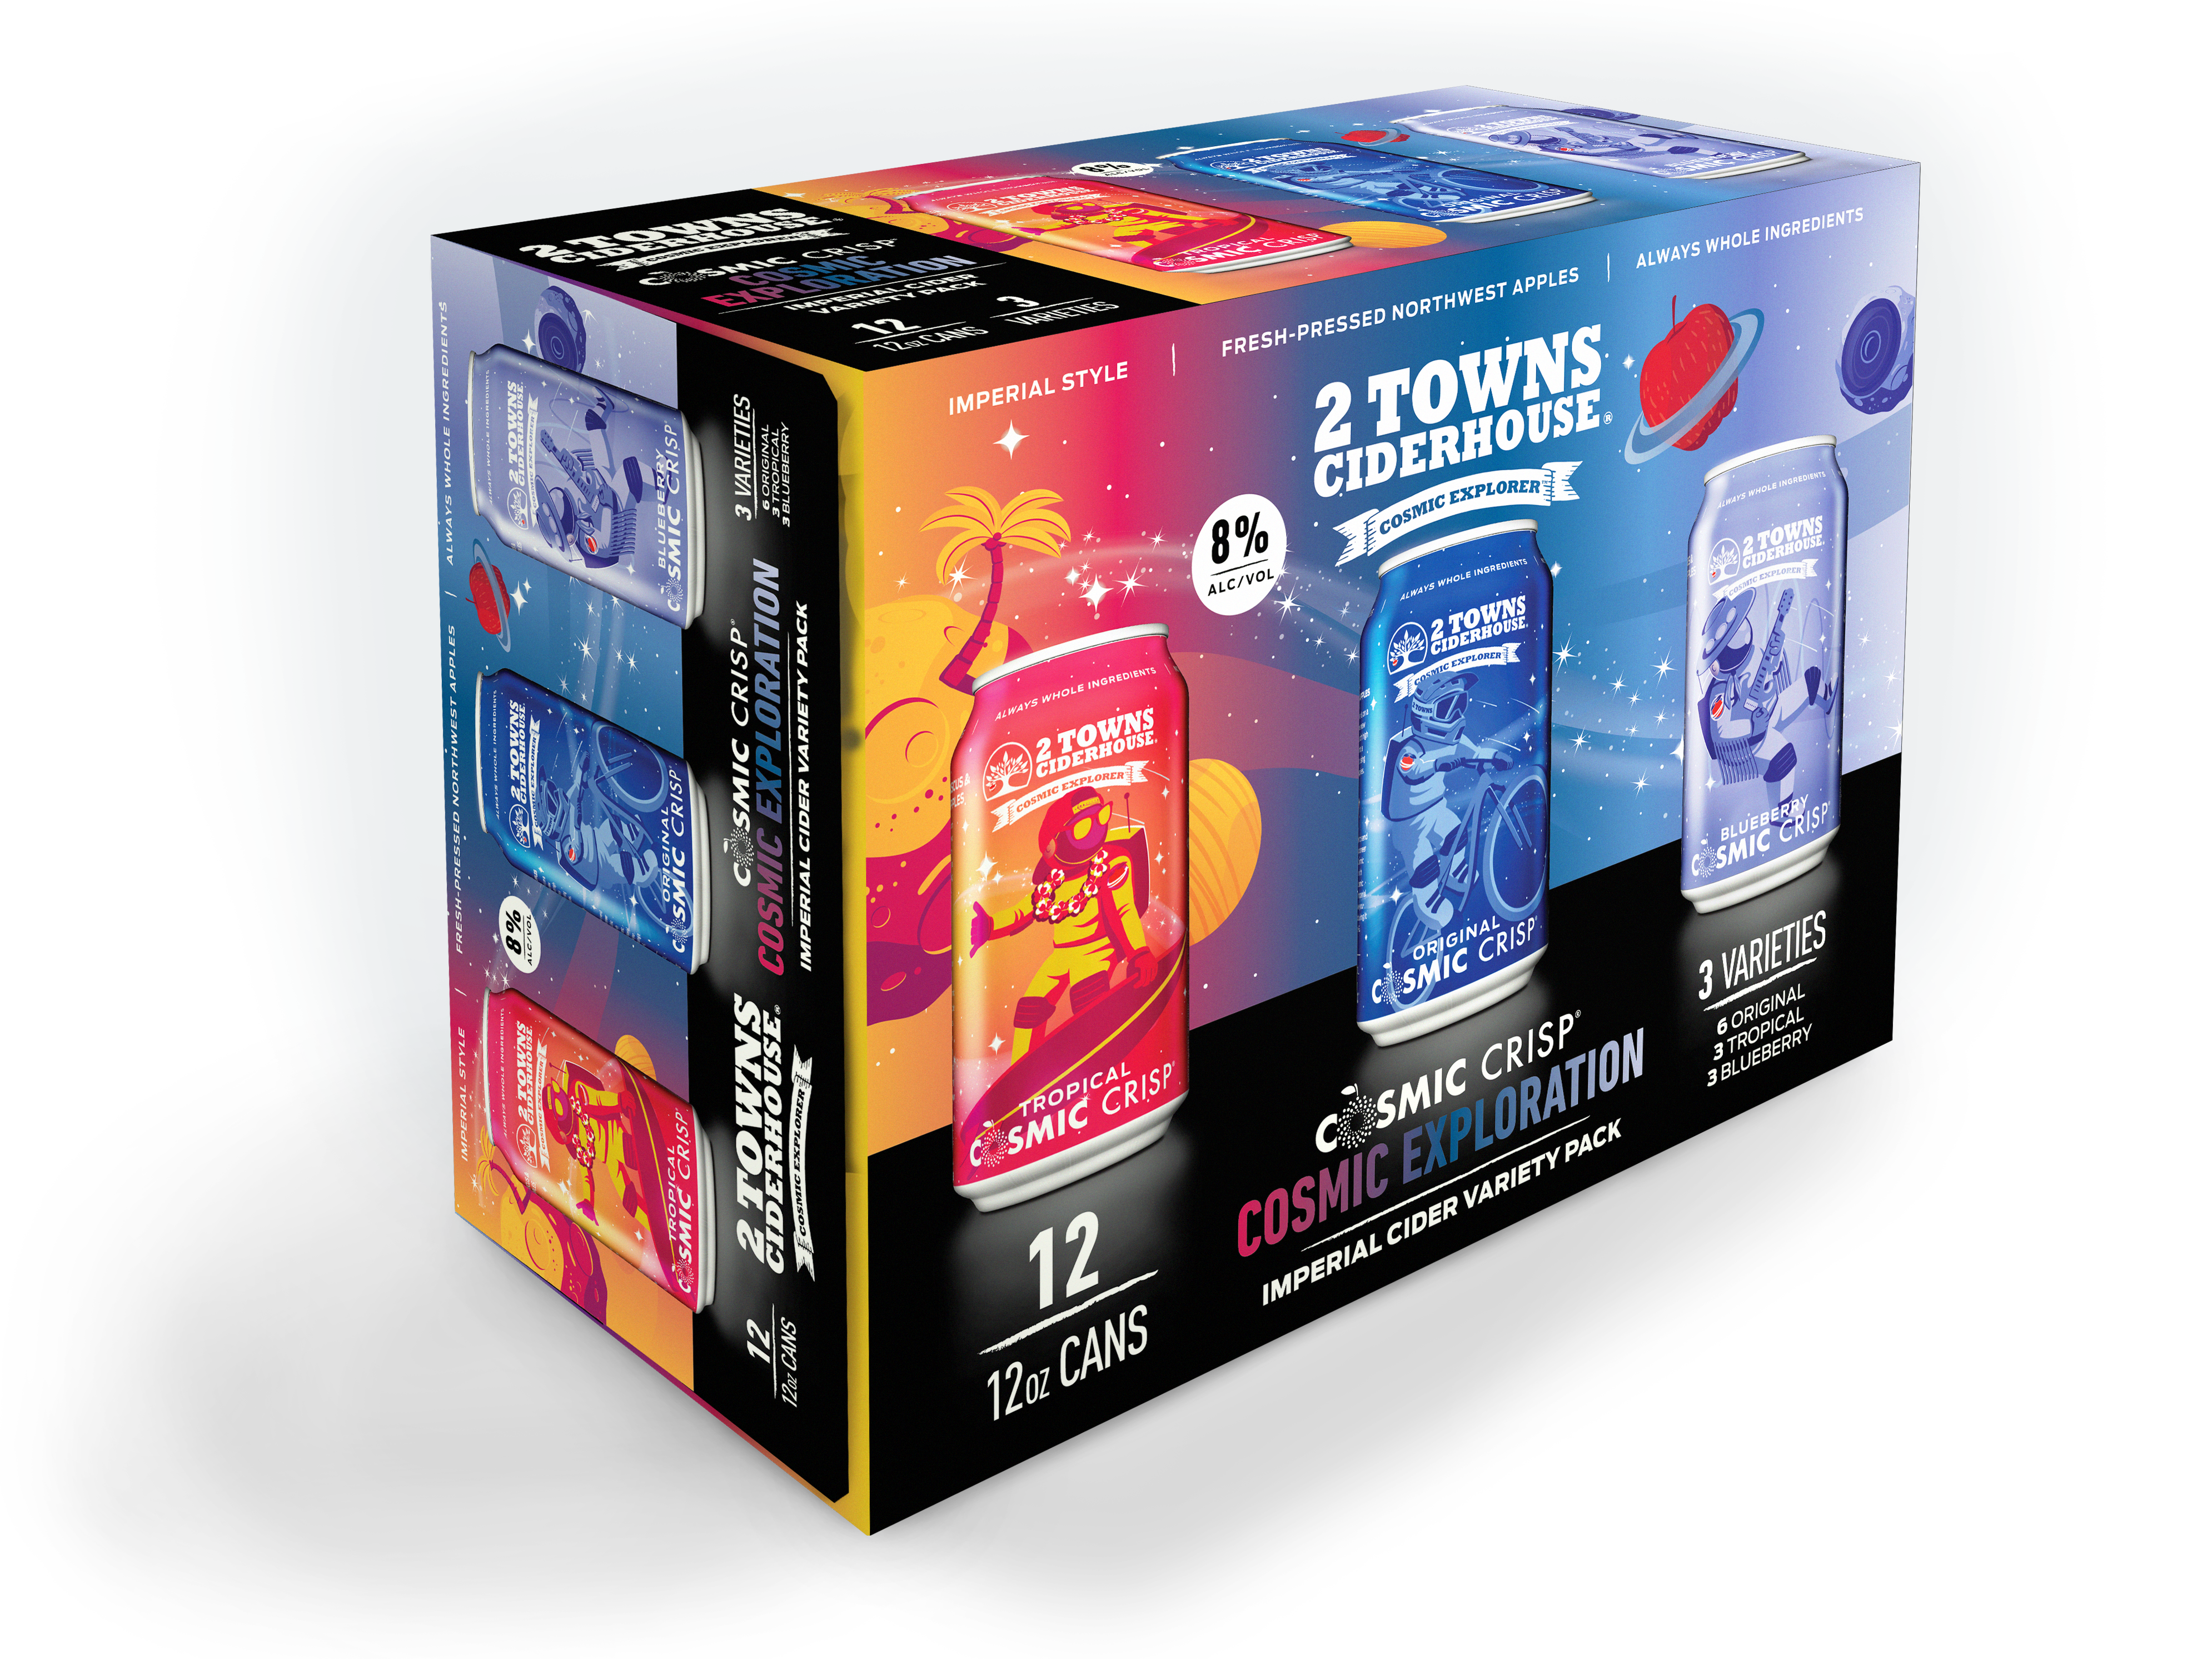 Can 12-Pack - Cosmic Explorer Variety Pack – 2 Towns Ciderhouse